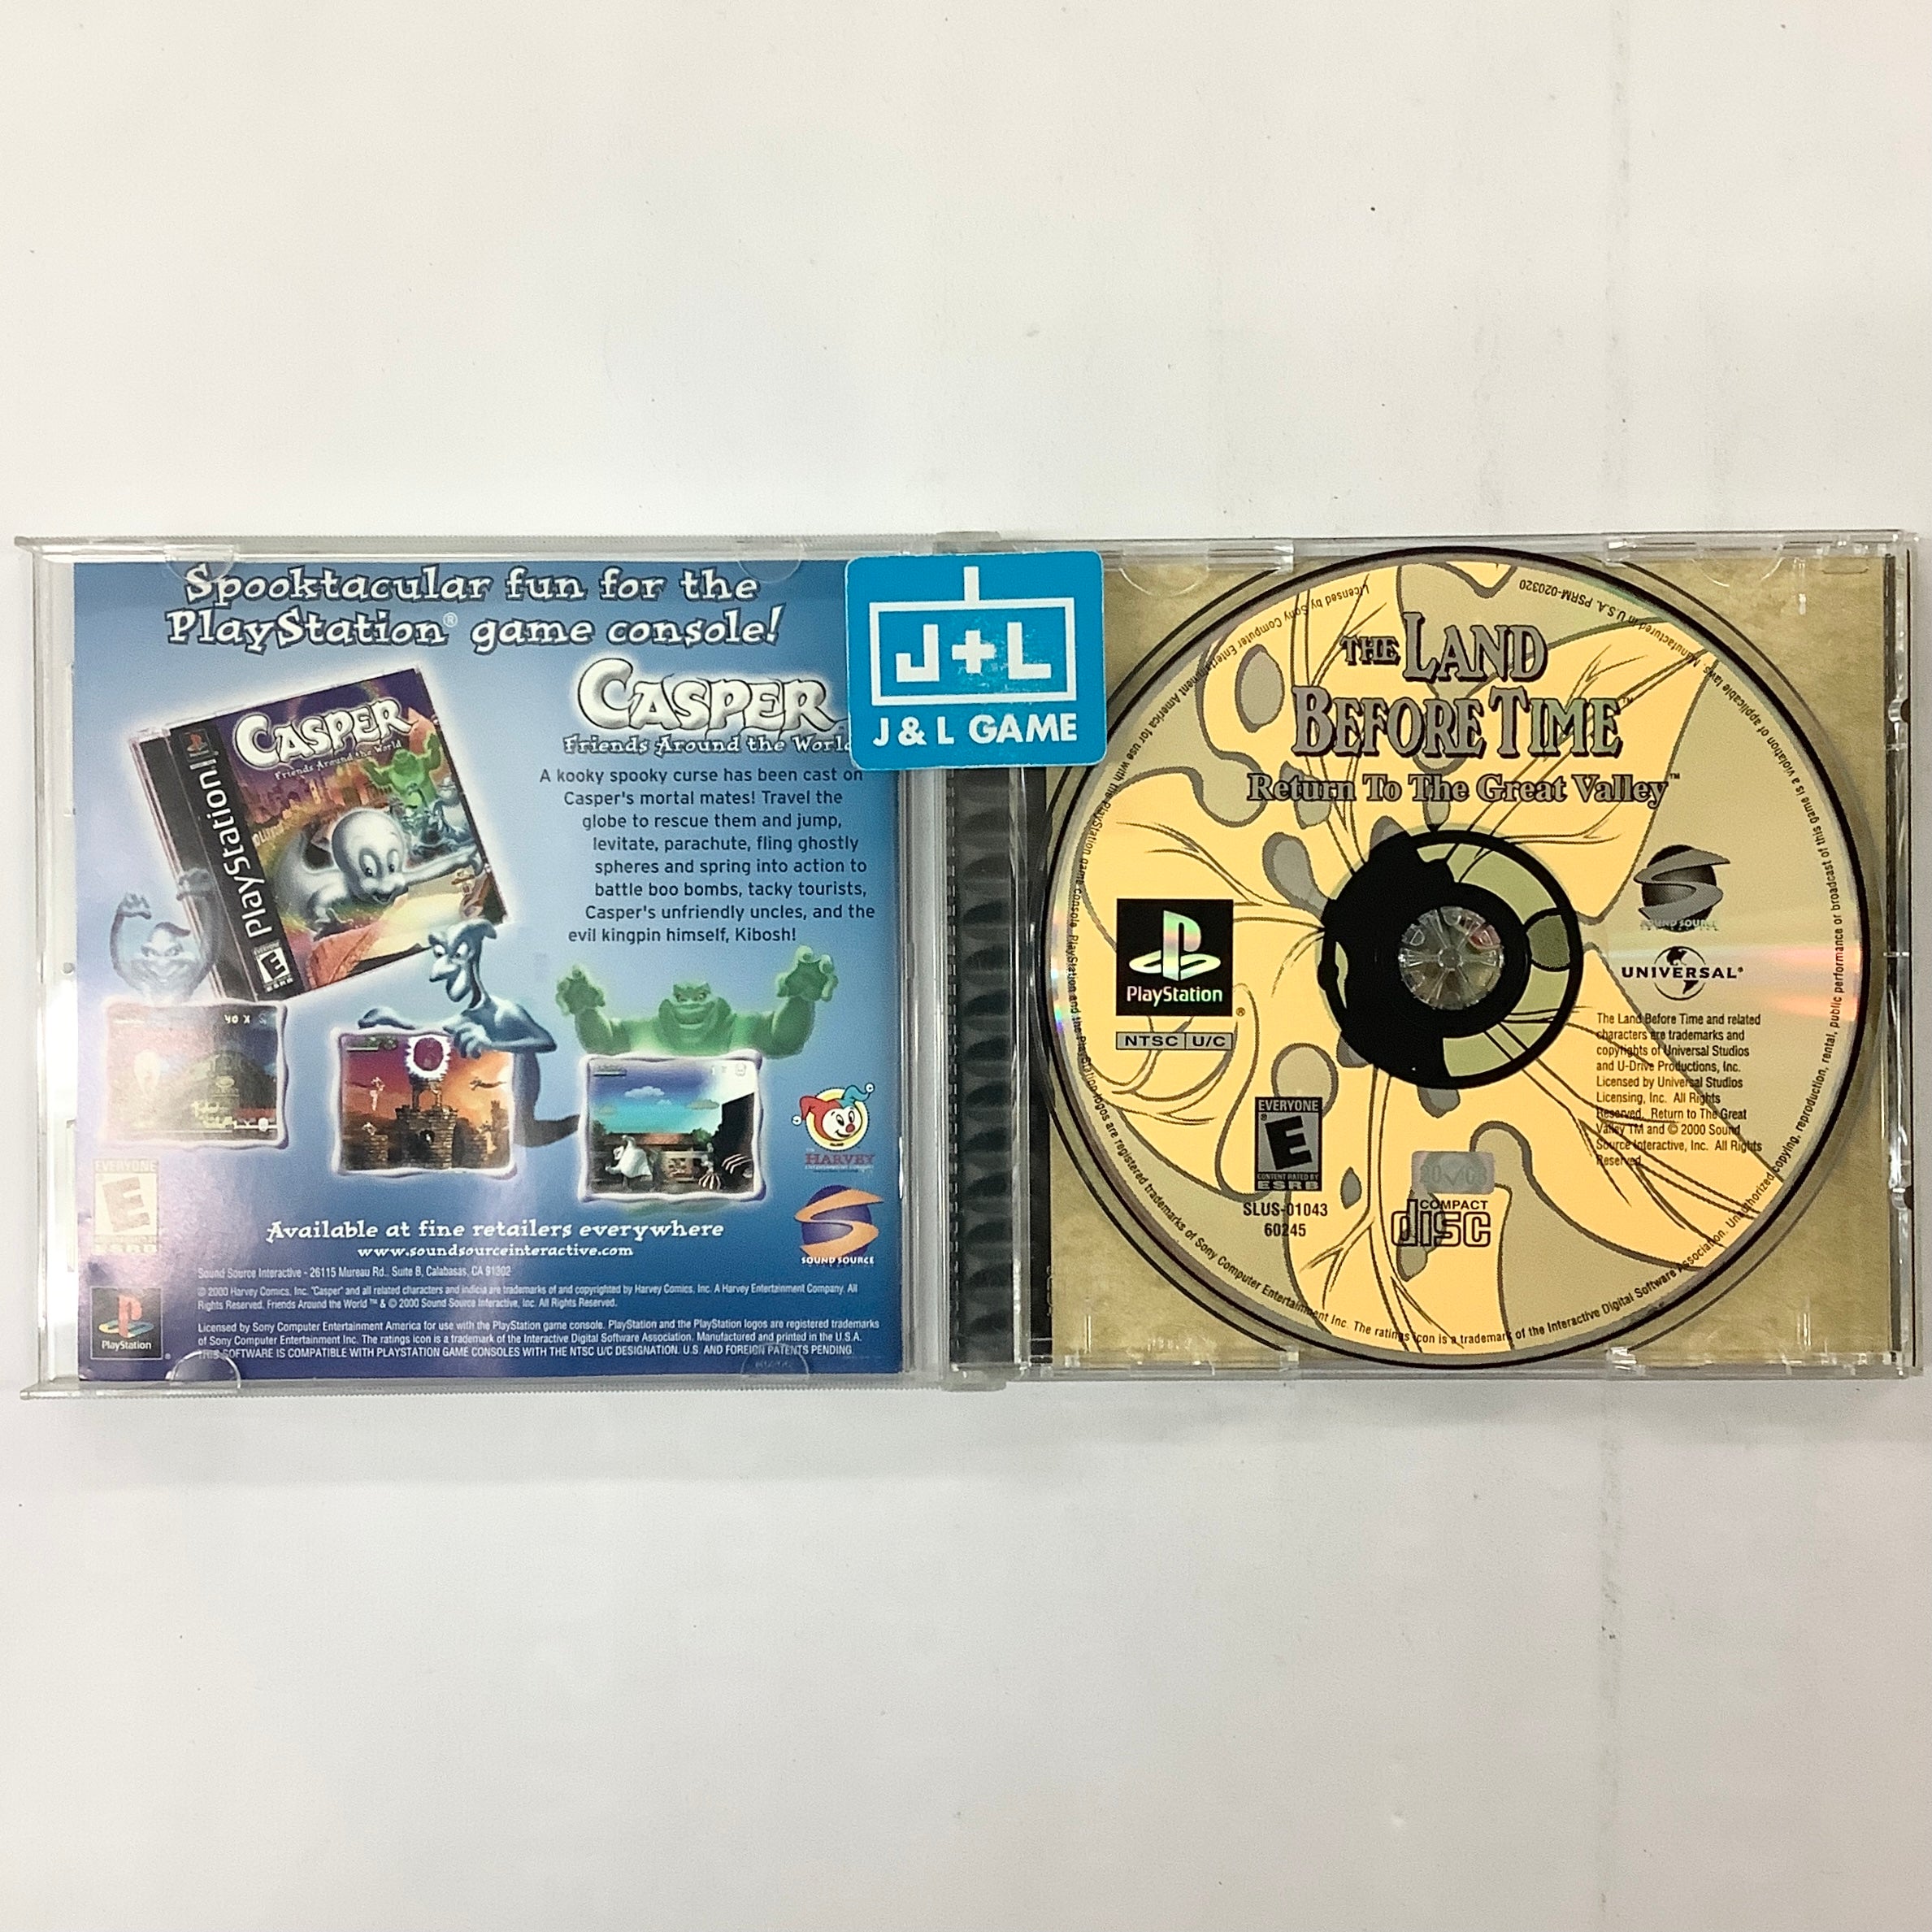 The Land Before Time: Return to the Great Valley - PlayStation 1 [Pre-Owned] Video Games Sound Source   